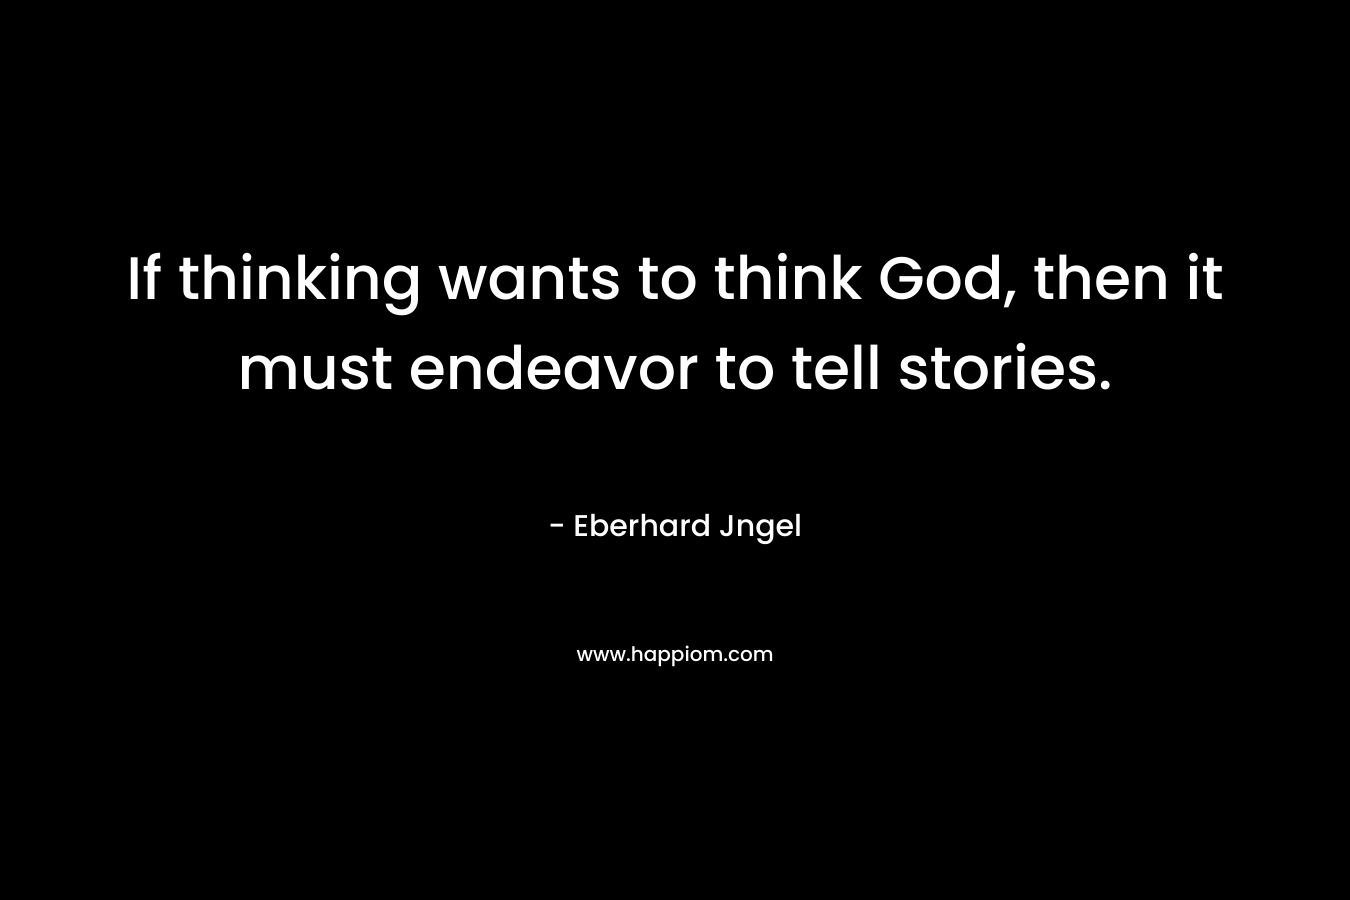 If thinking wants to think God, then it must endeavor to tell stories.